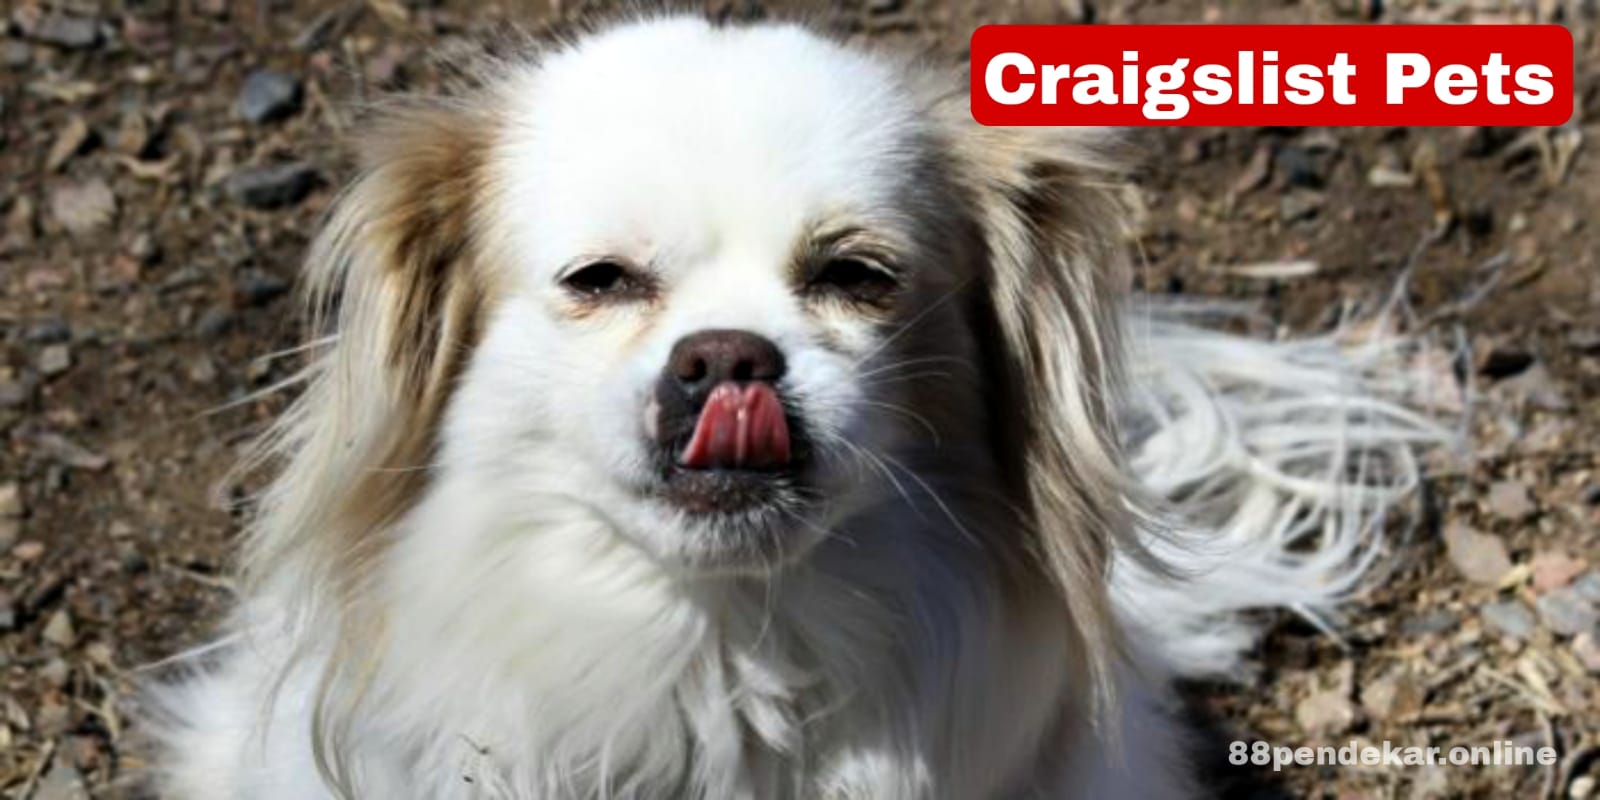 Craigslist Pets: Best Tips for Finding Your Furry Companion